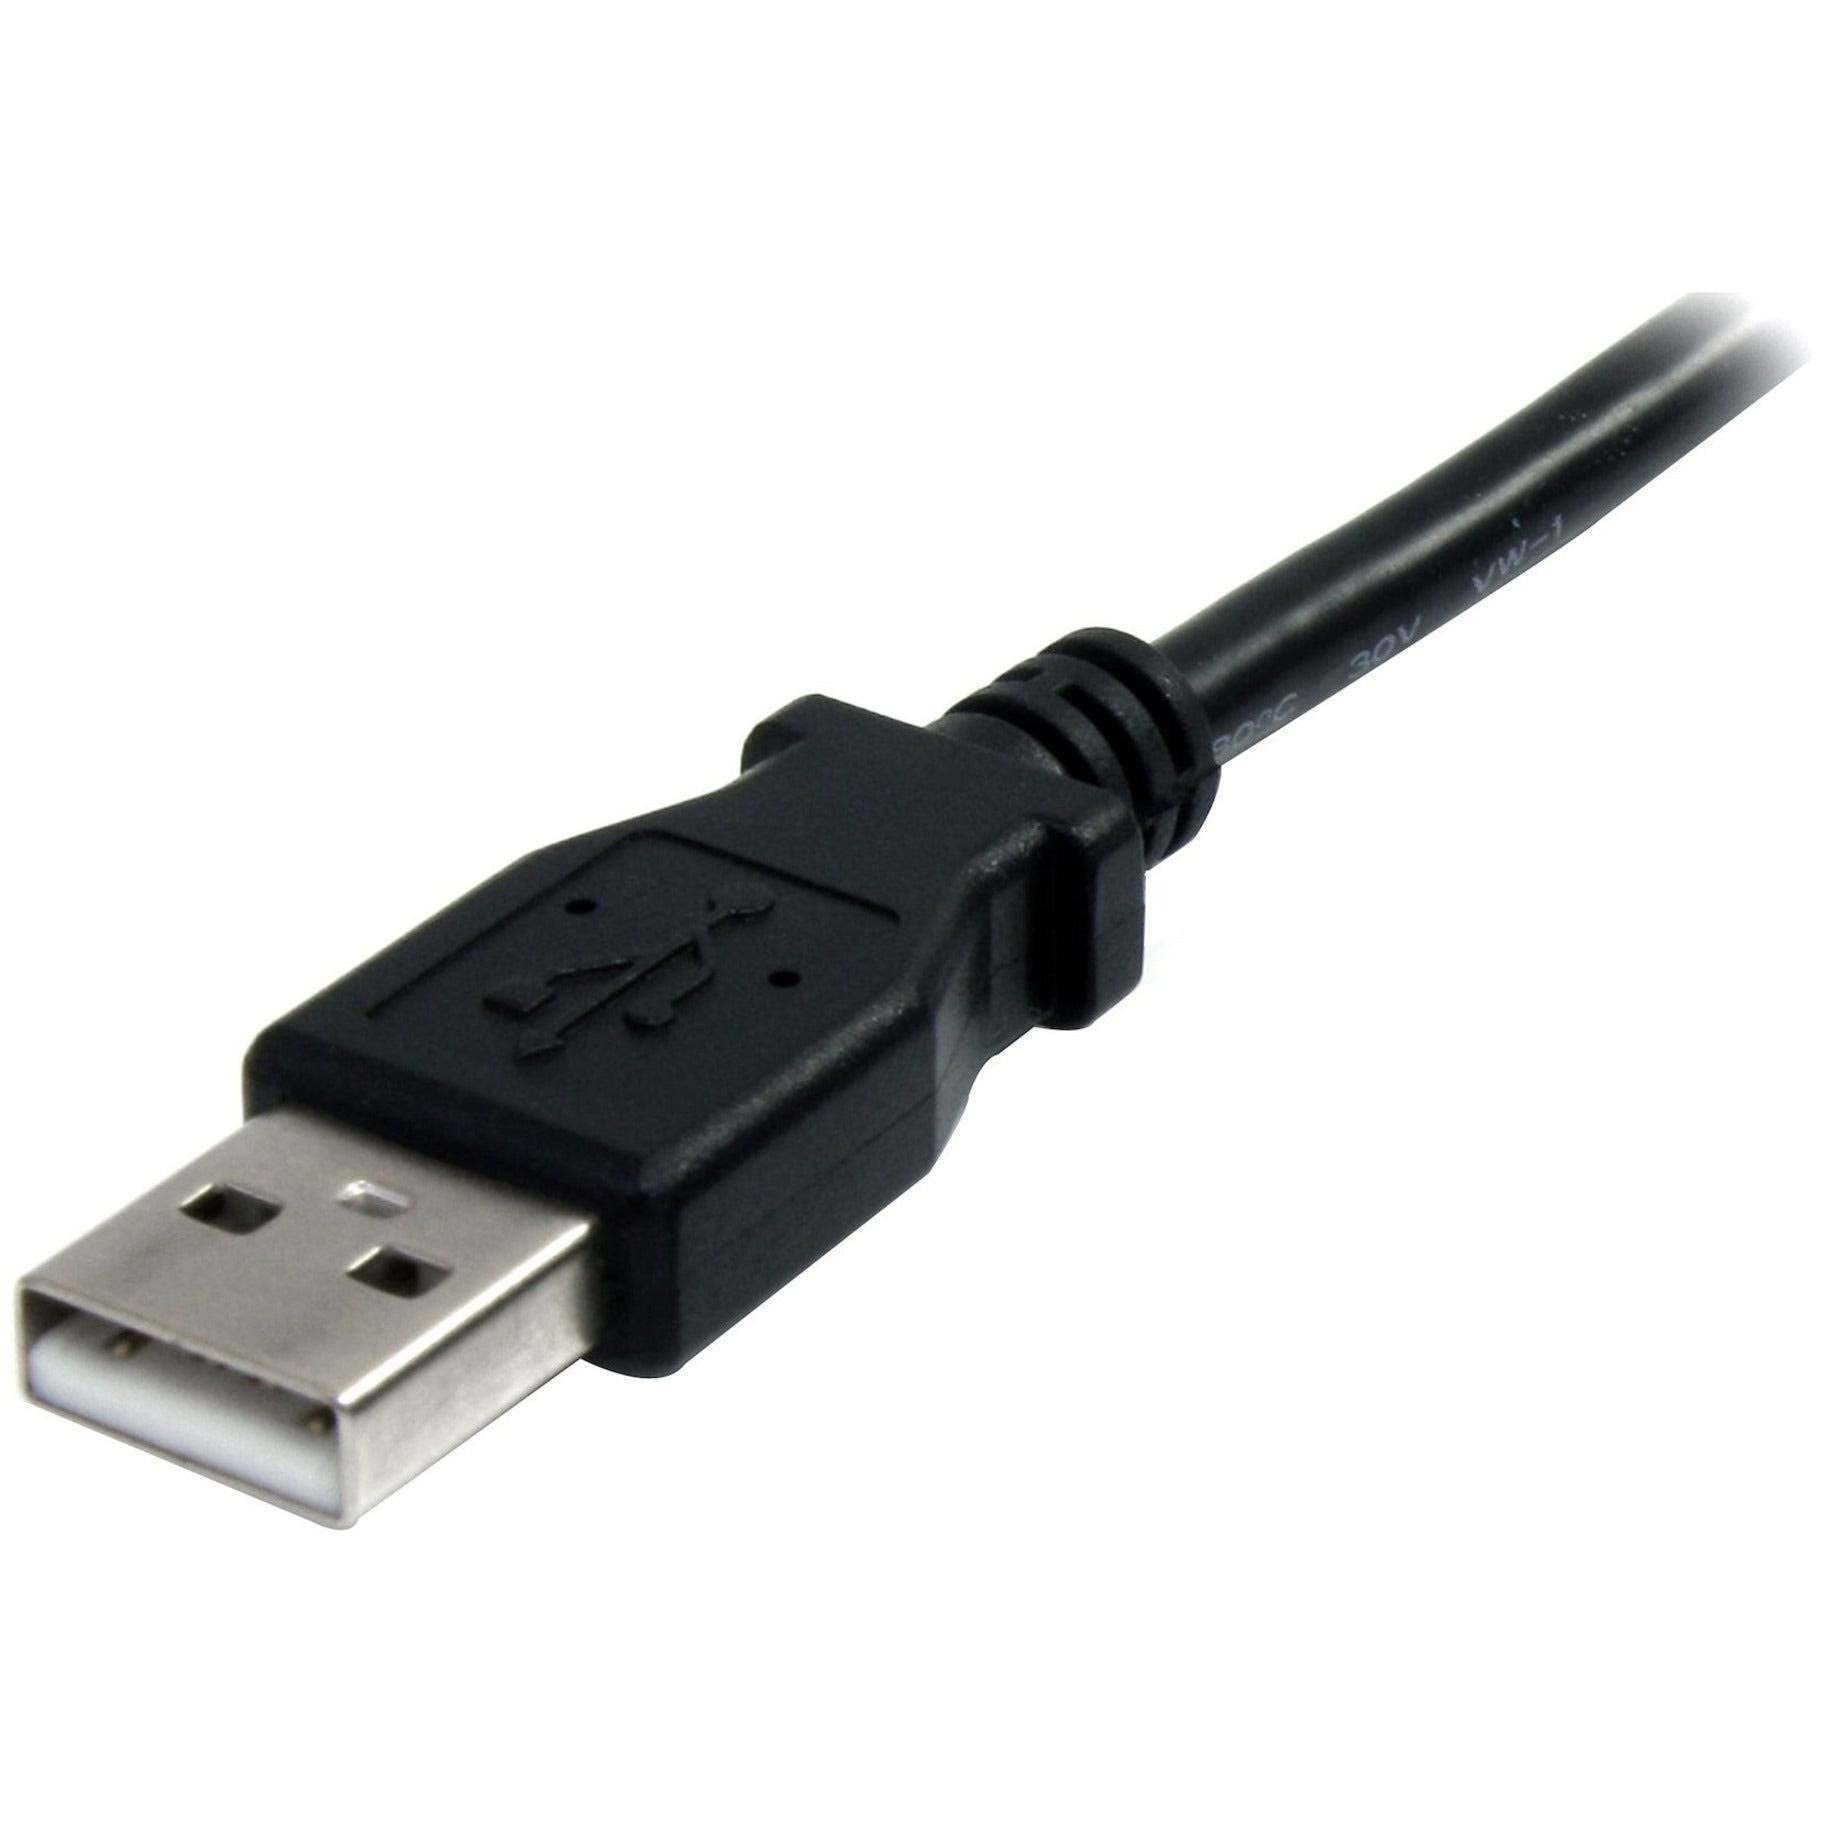 StarTech Usb 2 Extension Cable - Black, Cable A to Male or Female Data, 3'